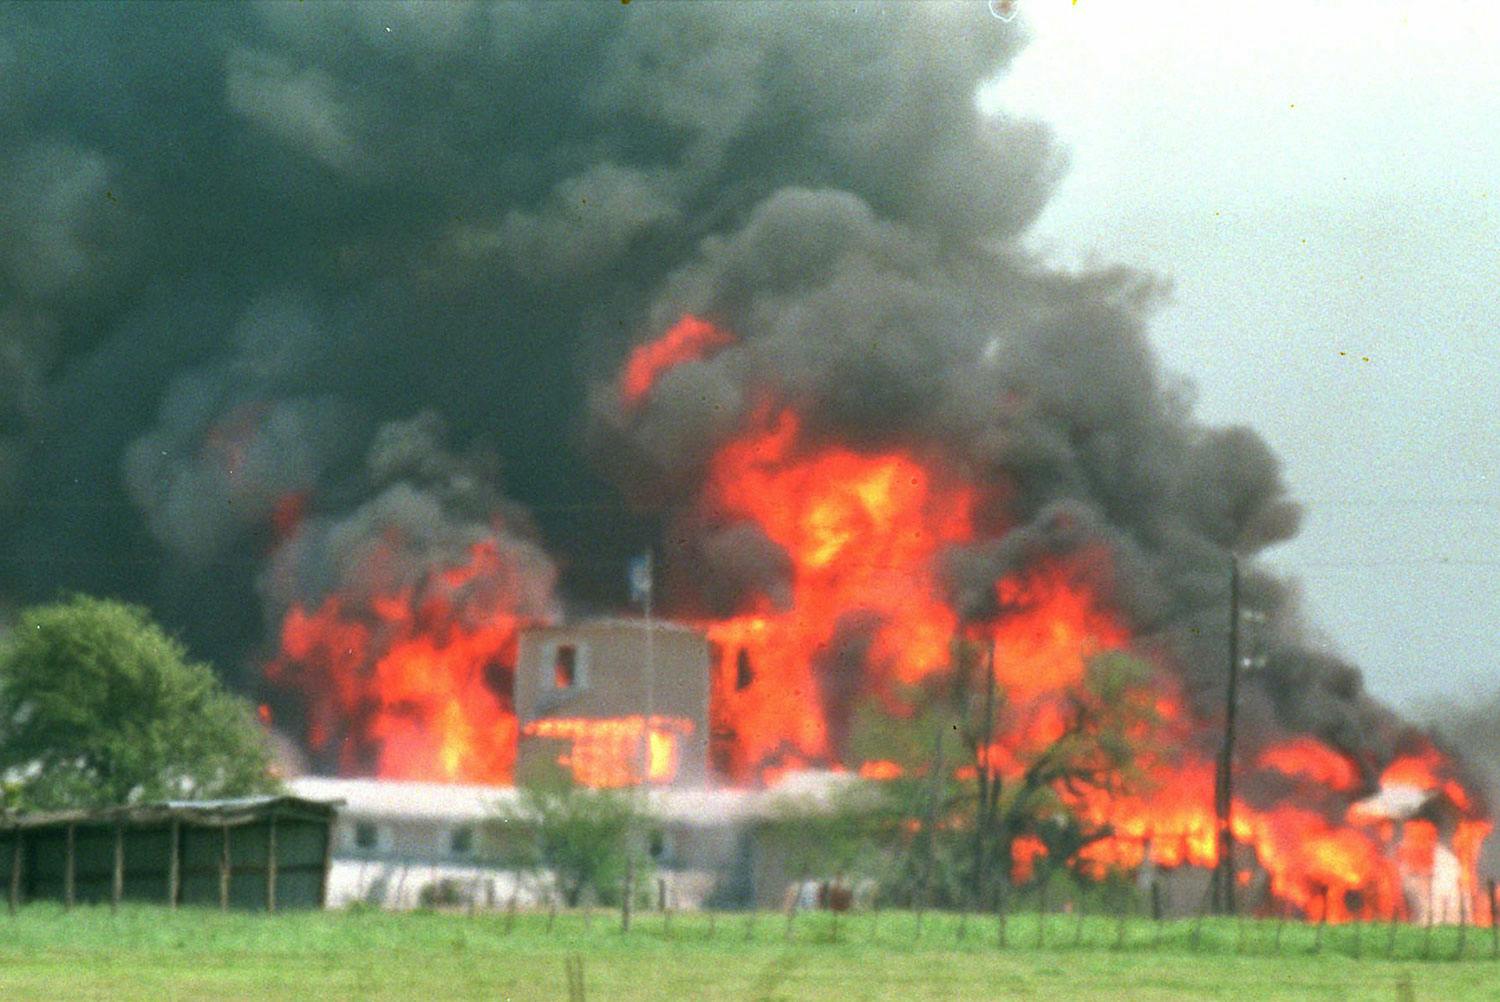 Branch Davidian Compound in Flames, surrounded by thick black smoke. 